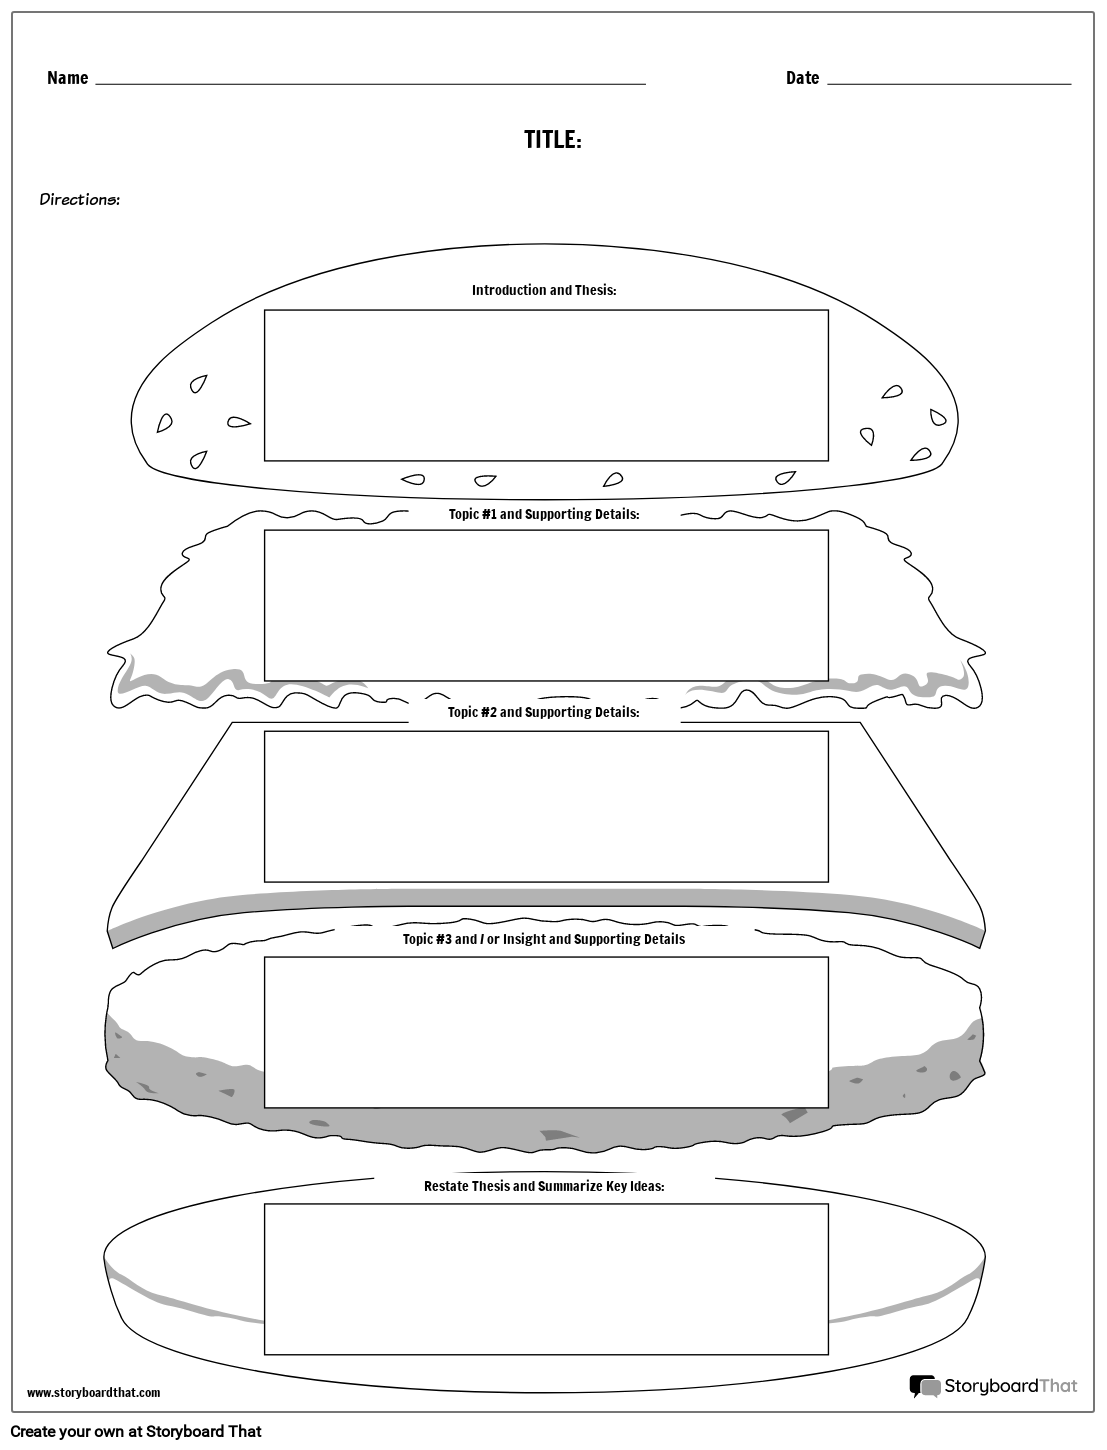 Long Composition Template Featuring a Hamburger